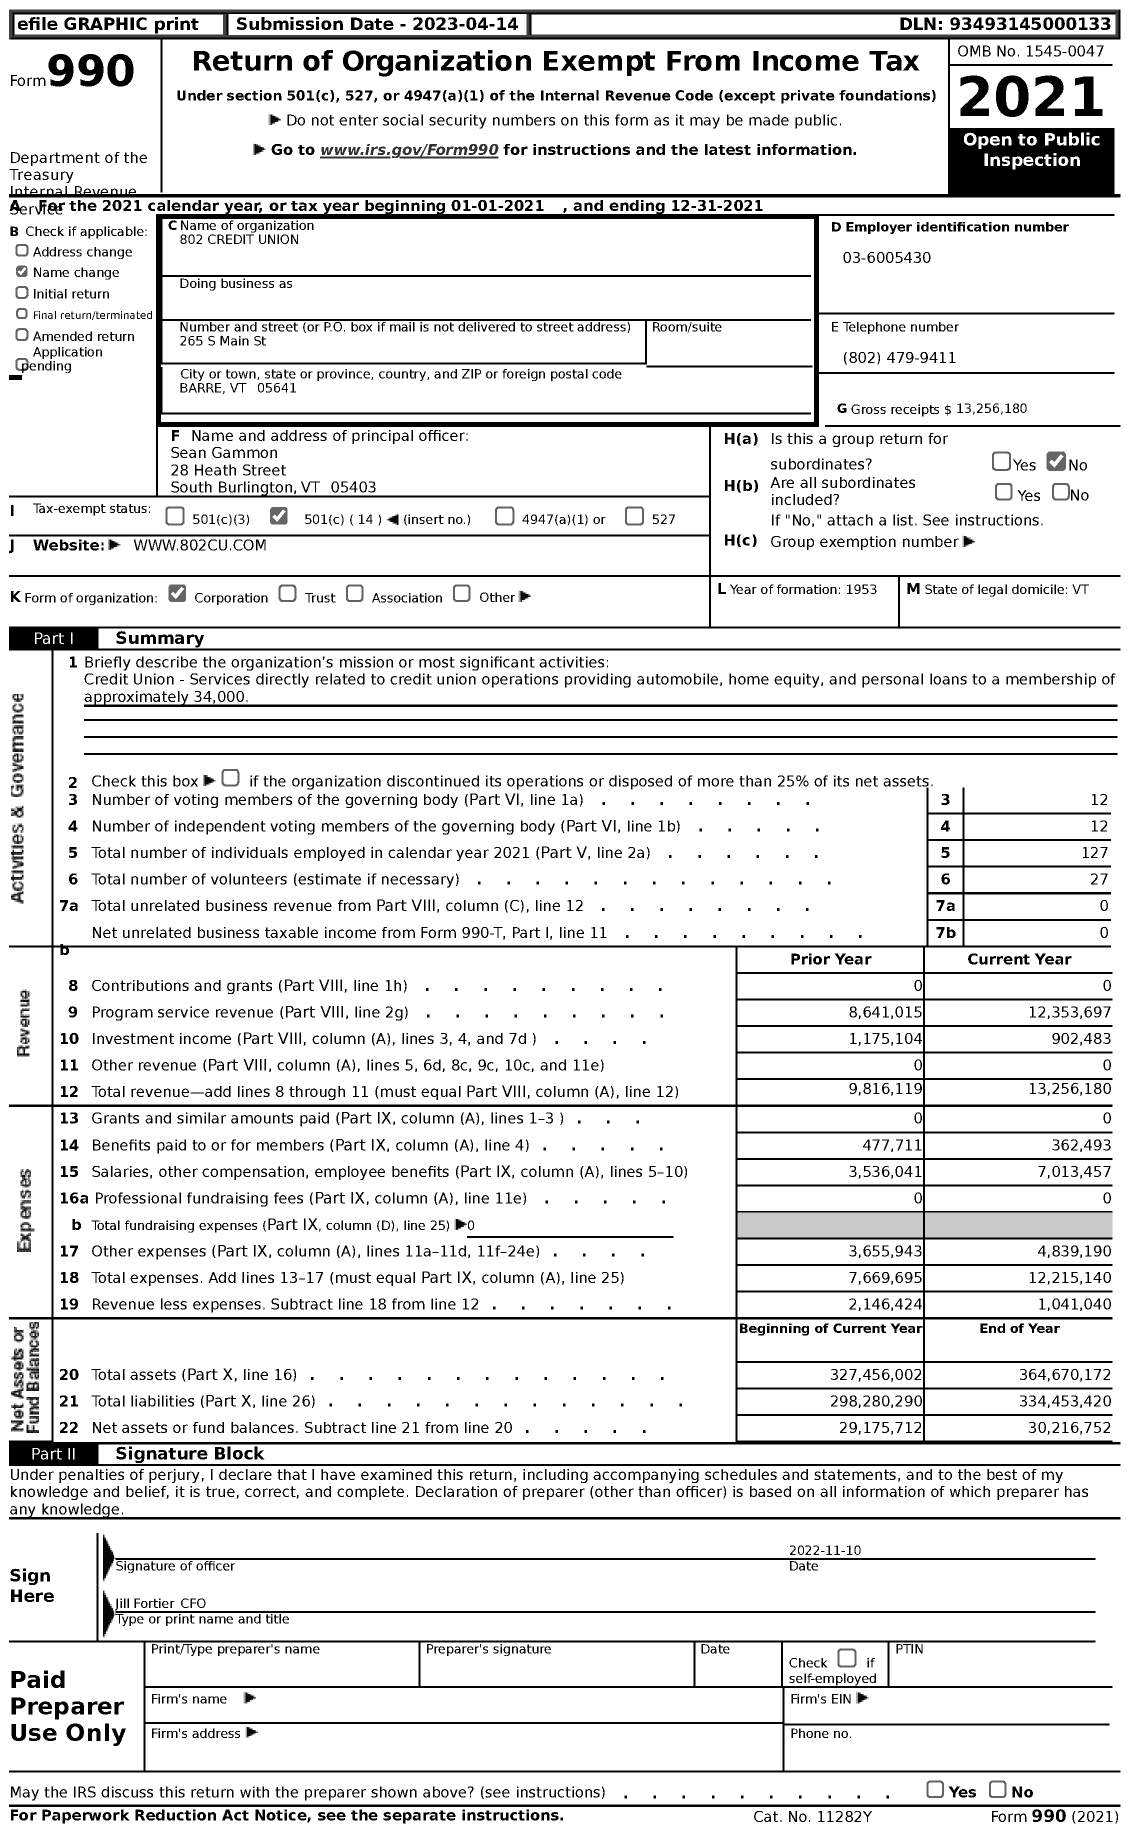 Image of first page of 2021 Form 990 for 802 Credit Union